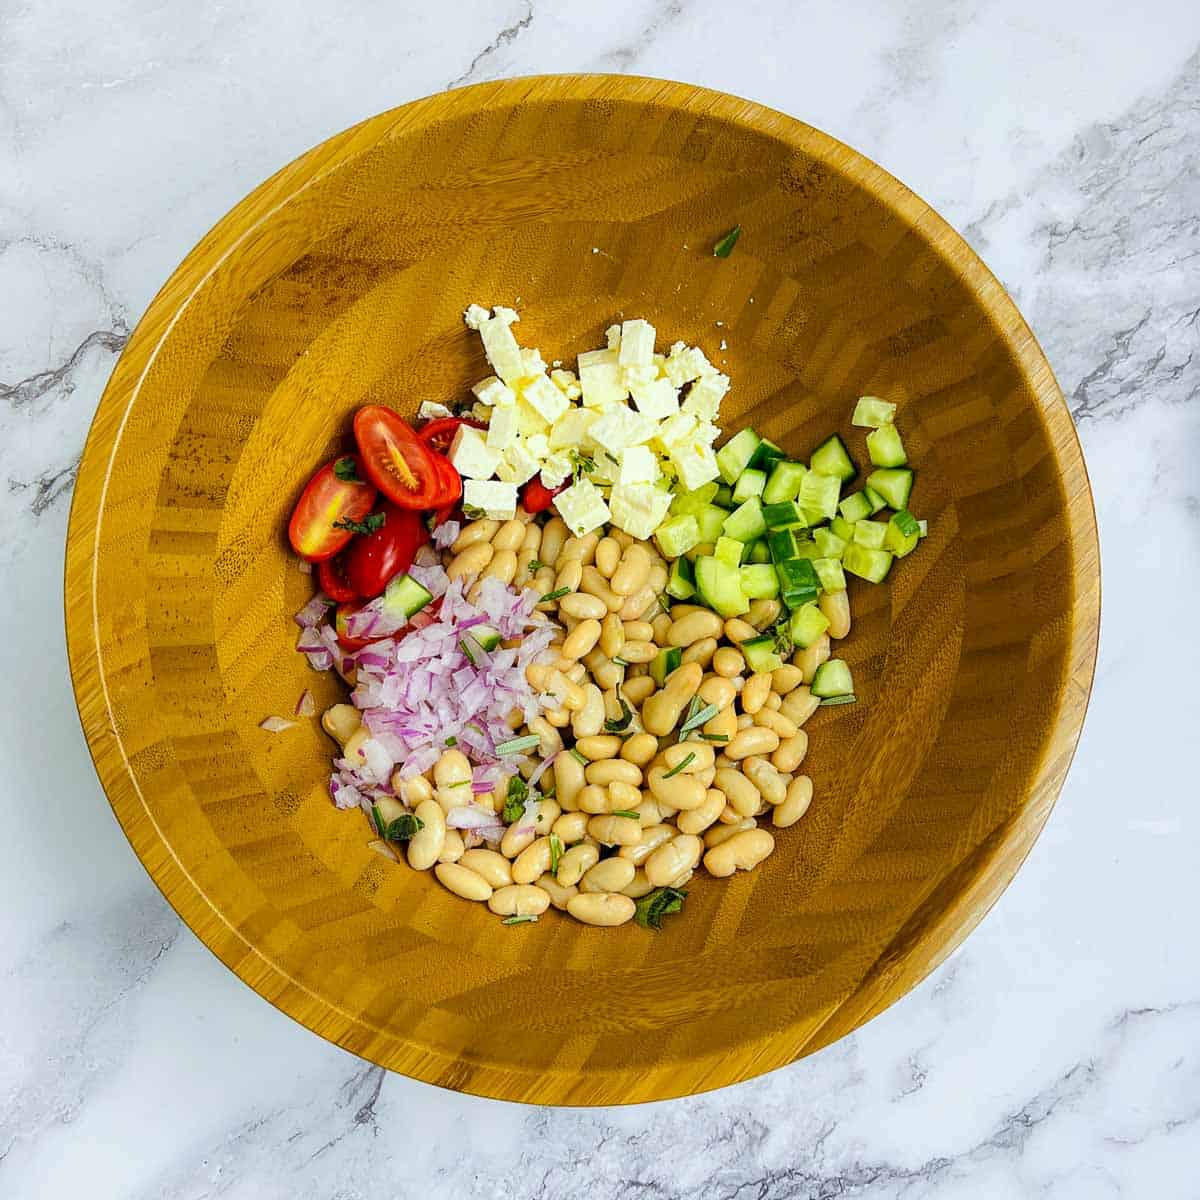 Veggies and beans in a mixing bowl.